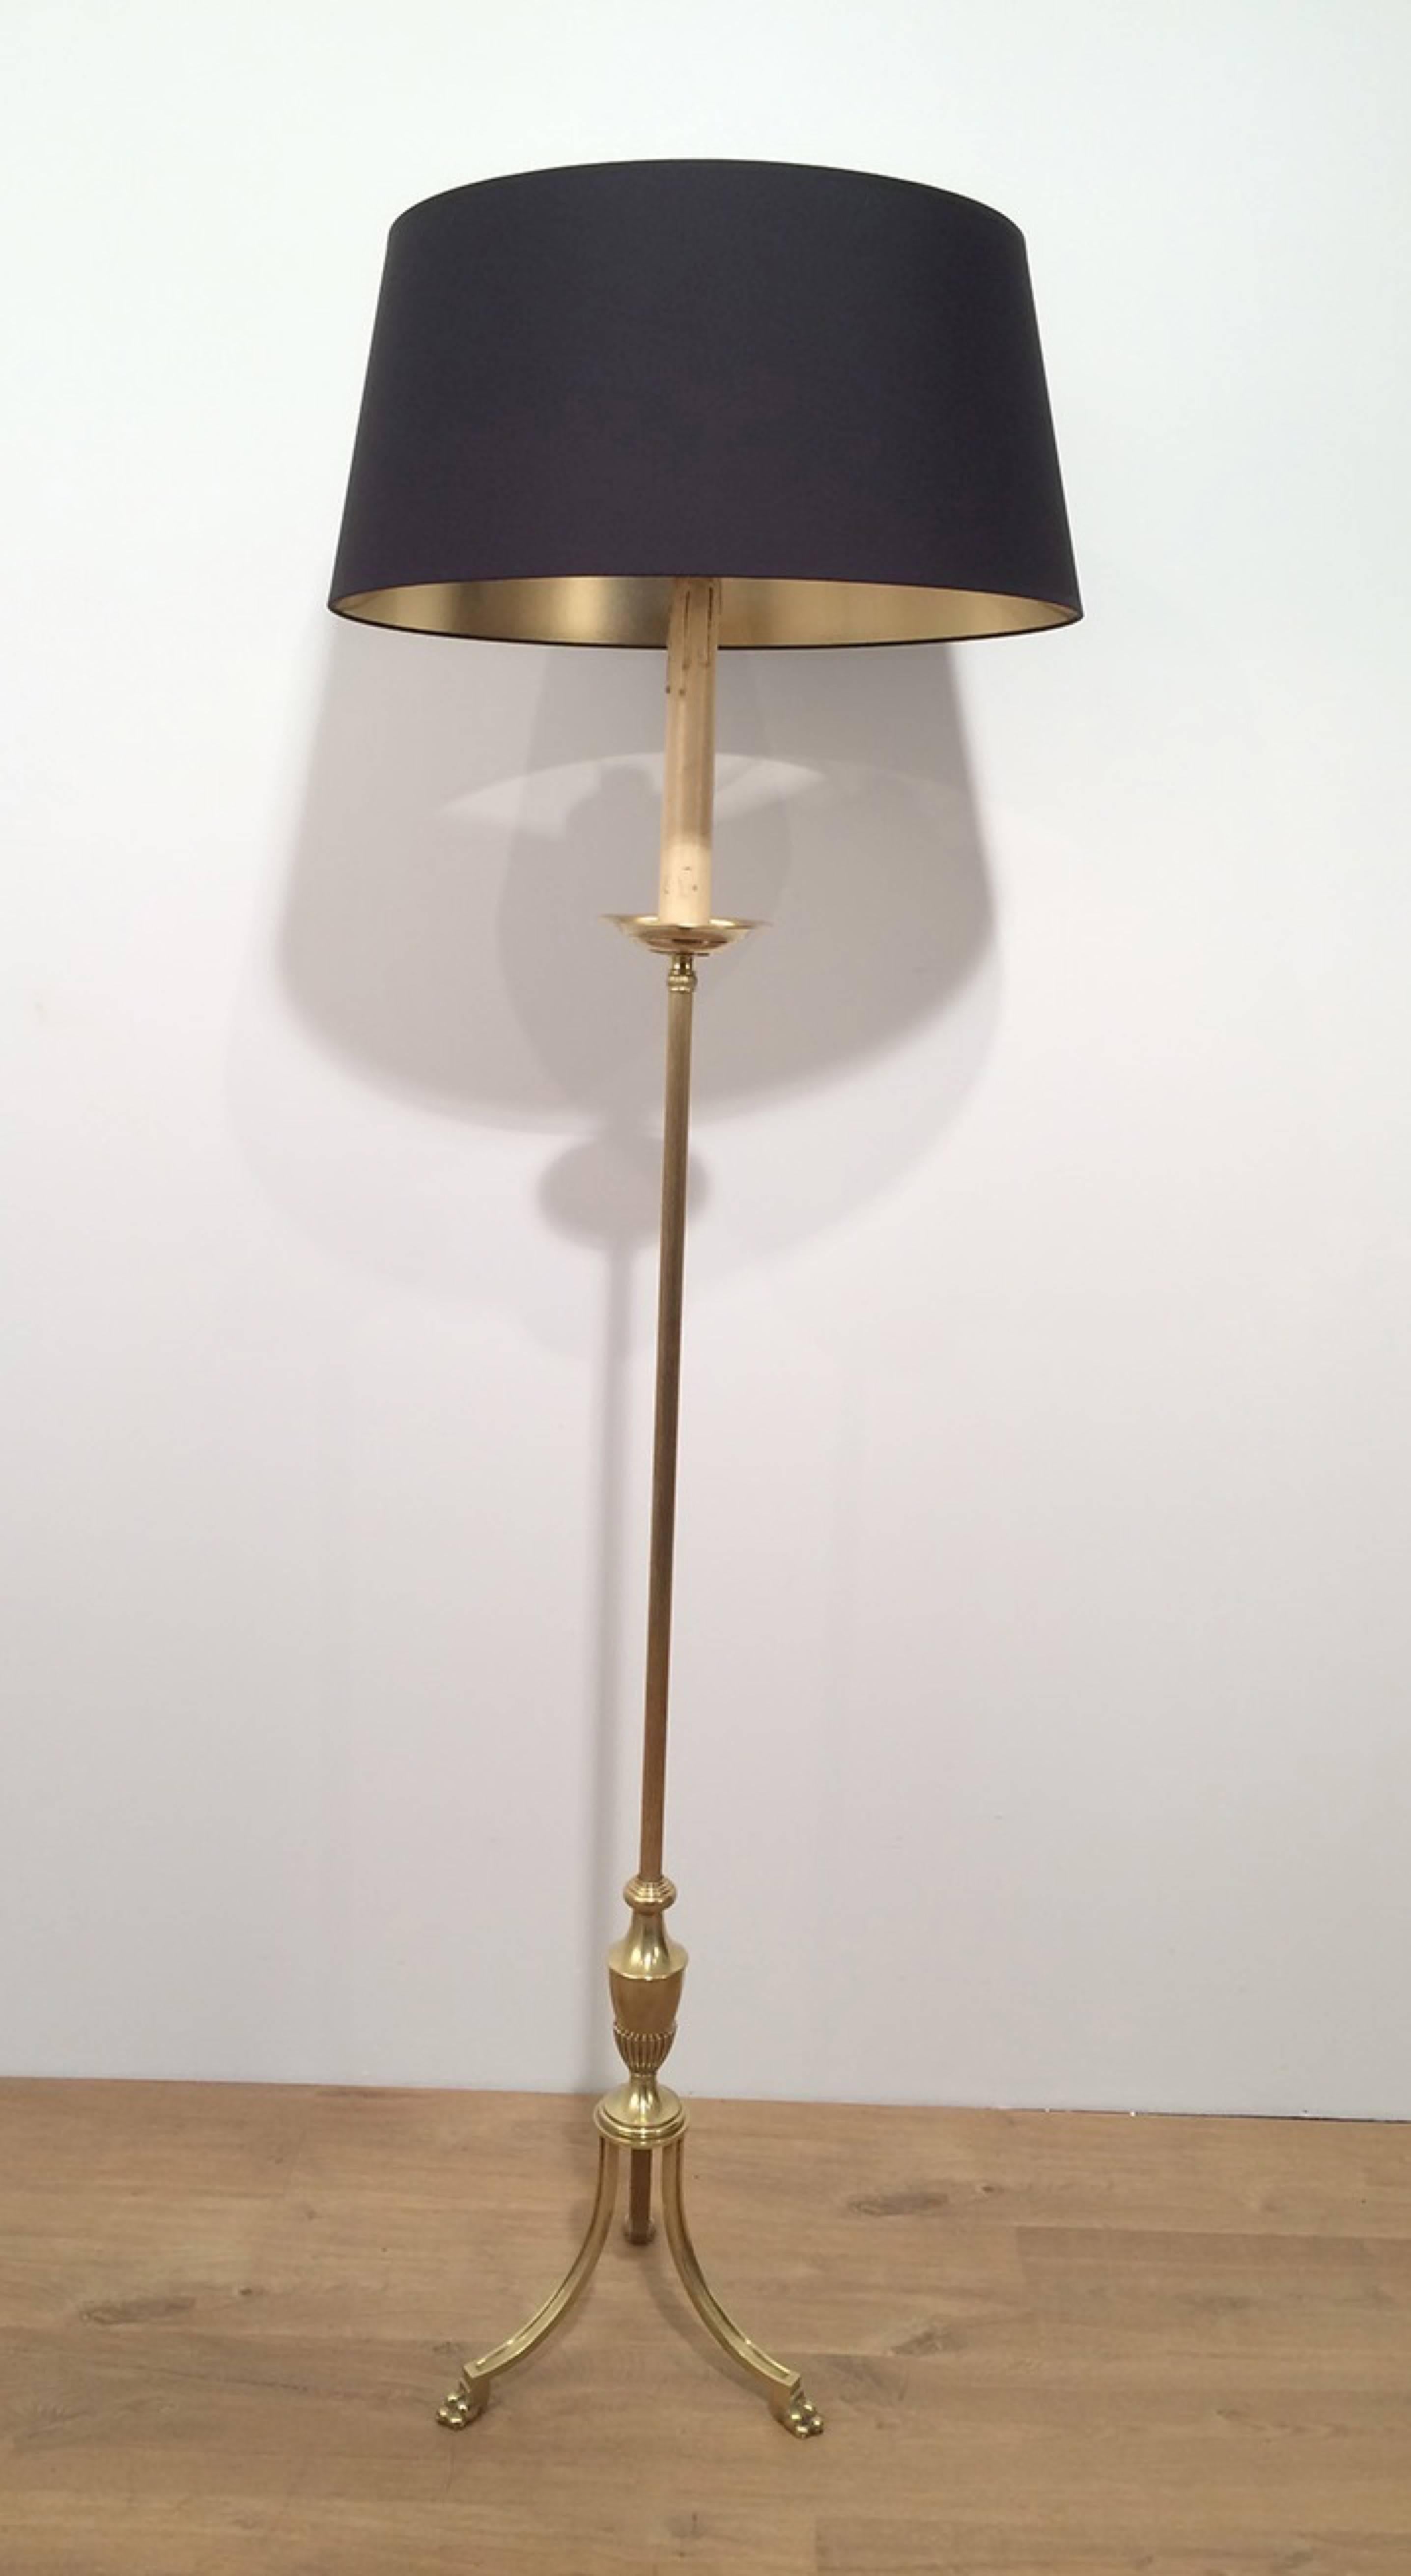 Elegant French floor lamp made by Maison Jansen in the 1940s. The tripod base is supported on case bronze animal feet. Can be wired for either American or European lampshade. Lampshade not included.

This floor lamp is currently in France, please